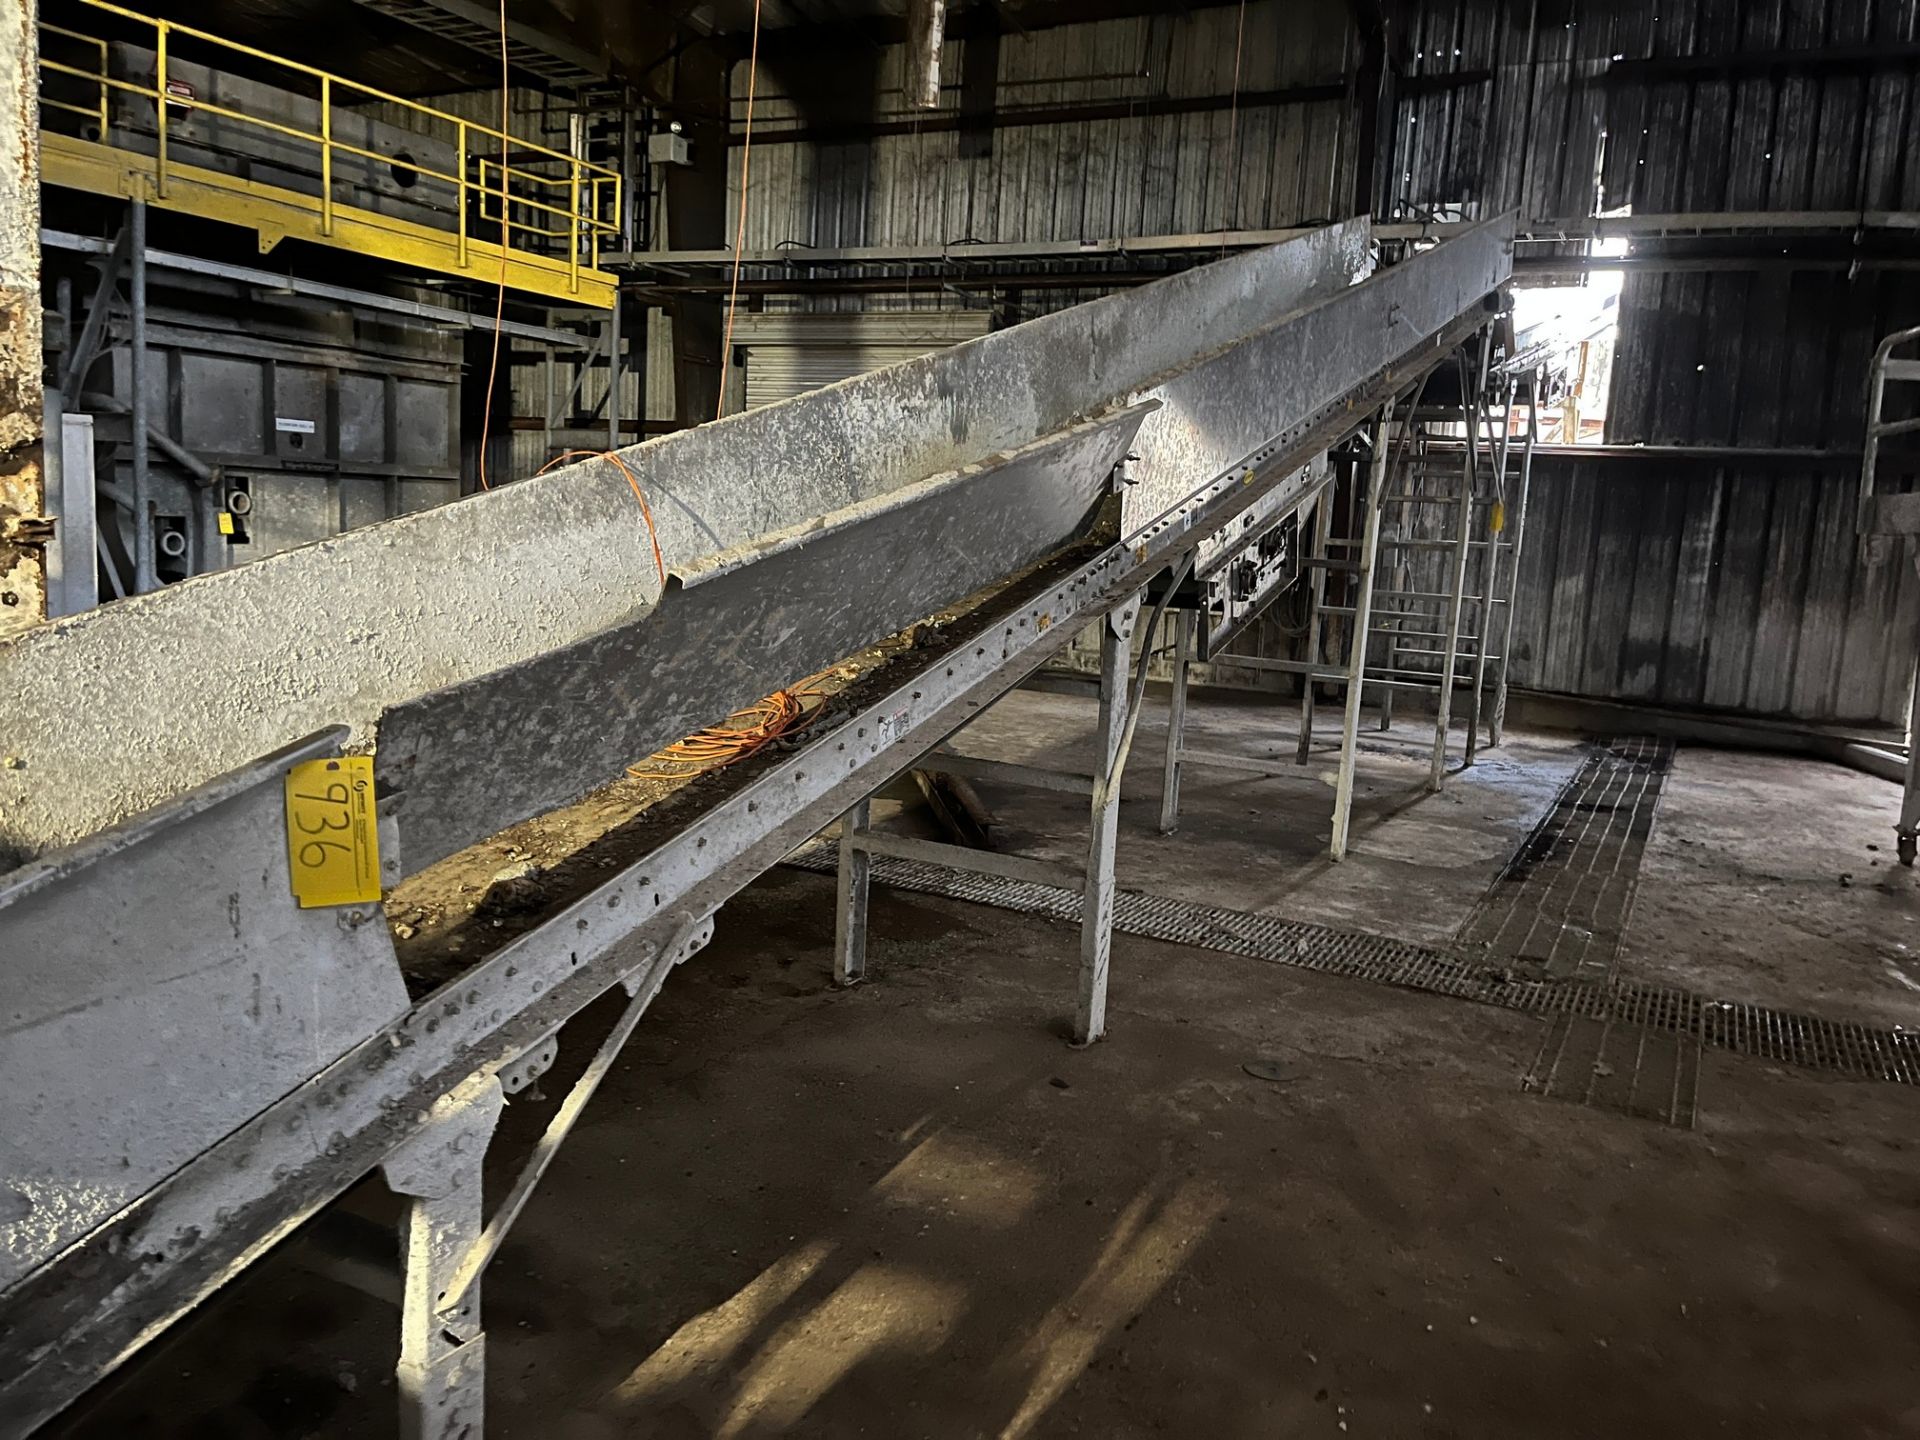 INCLINE BELT CONVEYORS (30' AND 35' = APPROX. 65' TOTAL LENGTH) W/ MOTOR DRIVE (DEINKING BUILDING,